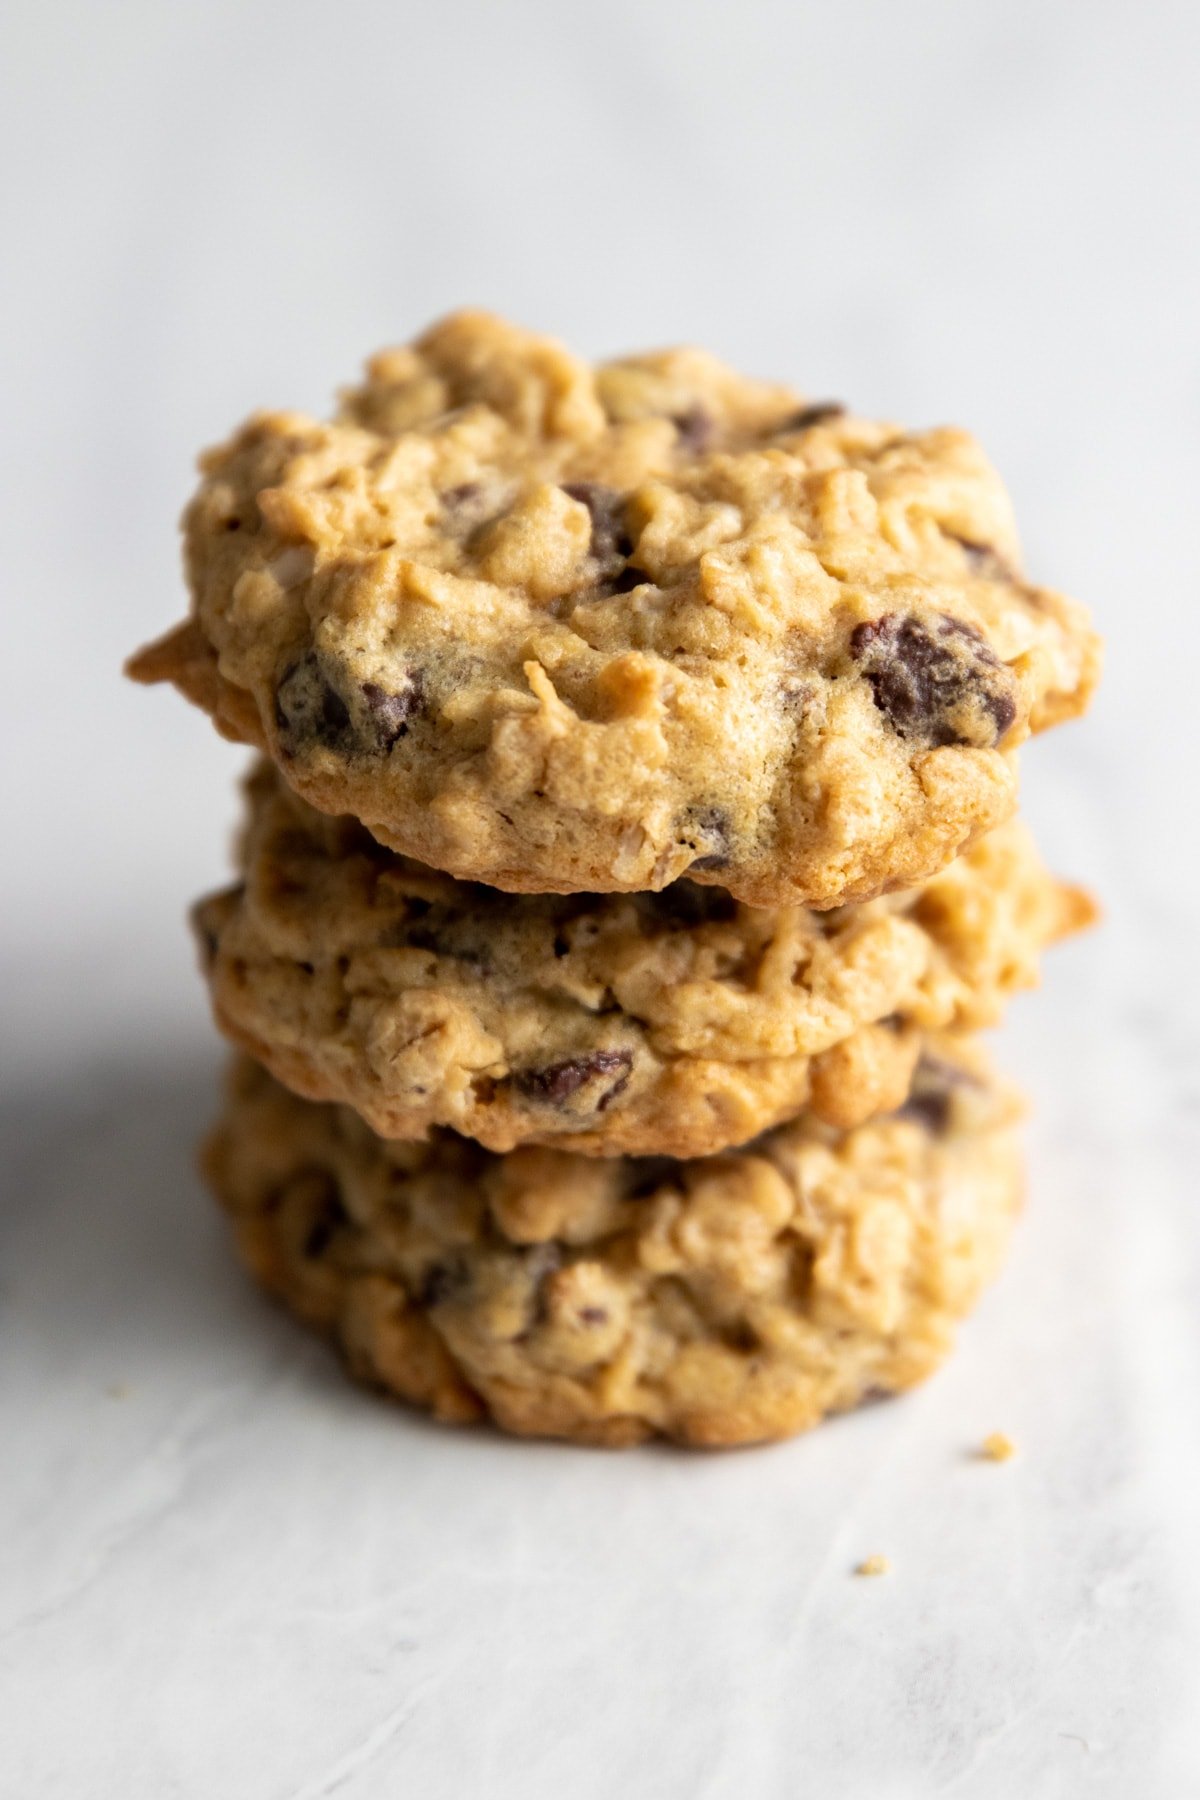 A stack of three low FODMAP oatmeal chocolate chip cookies.